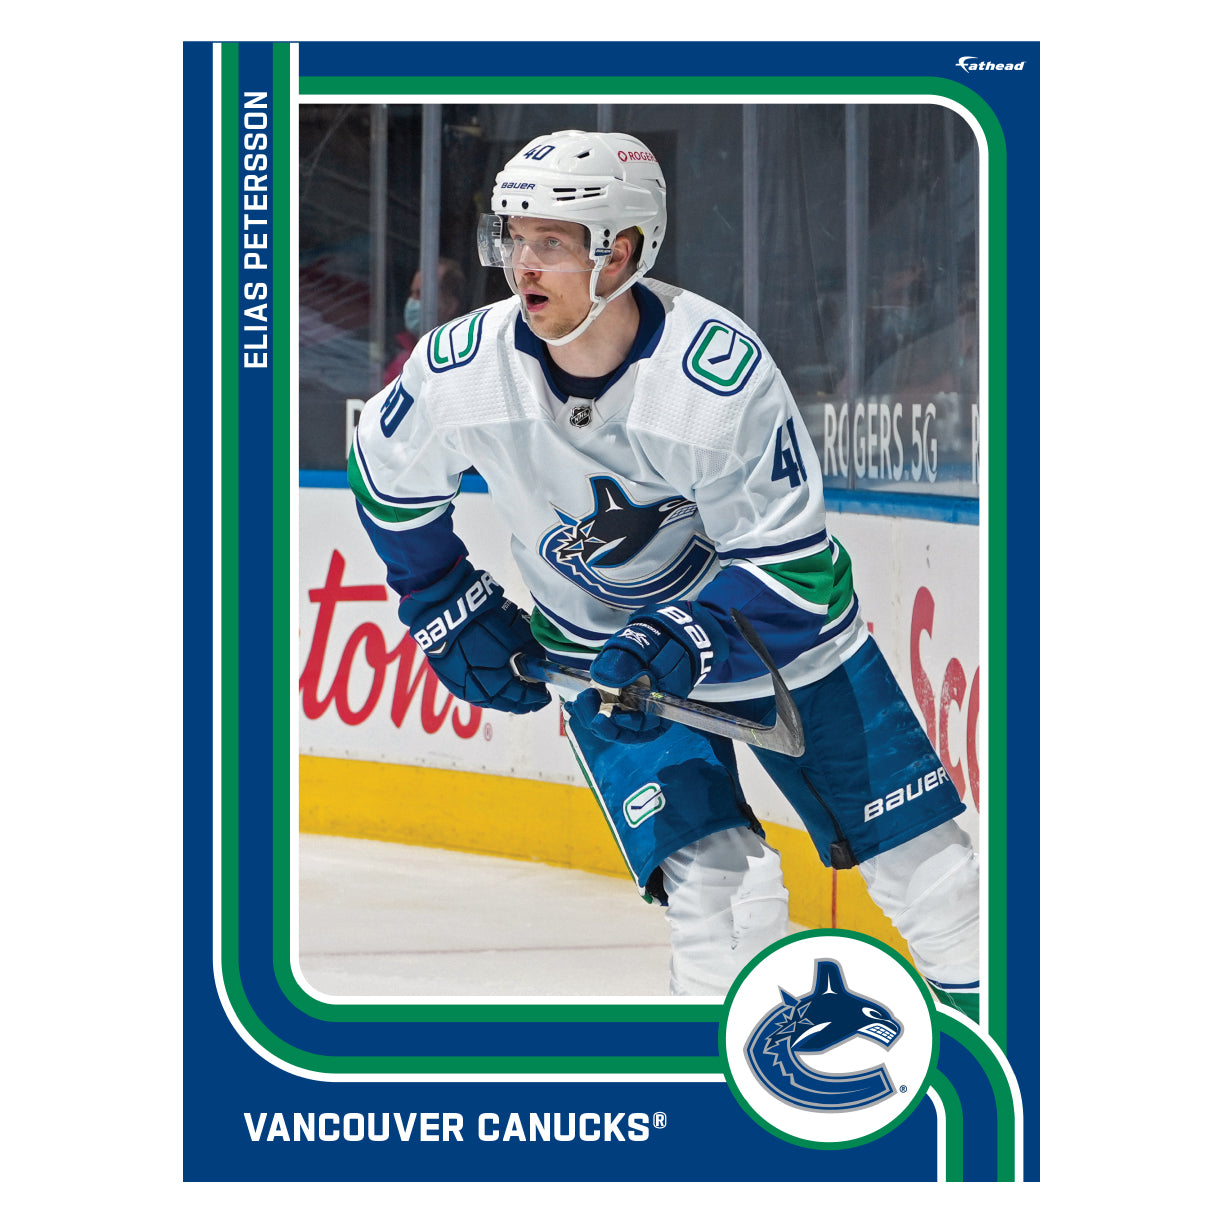 Vancouver Canucks NHL Official Licensed Merchandise